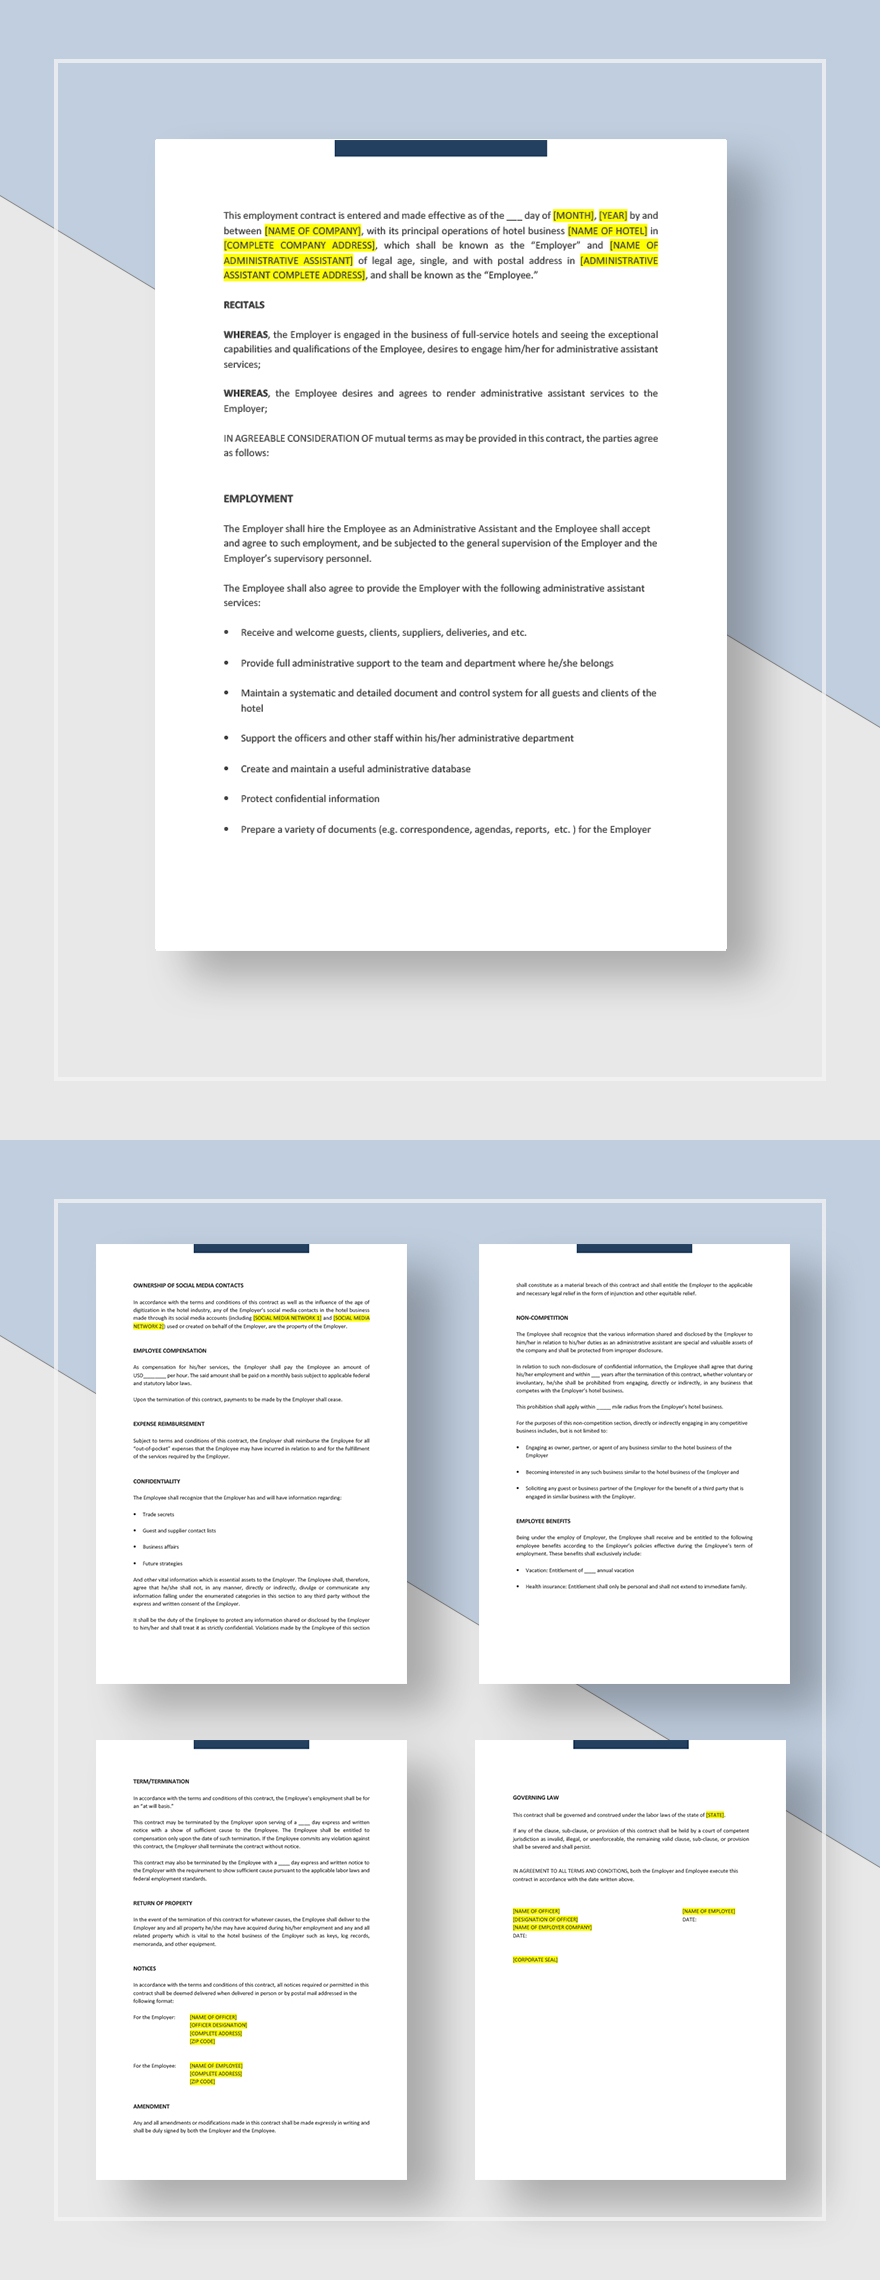 Employee Contract Template